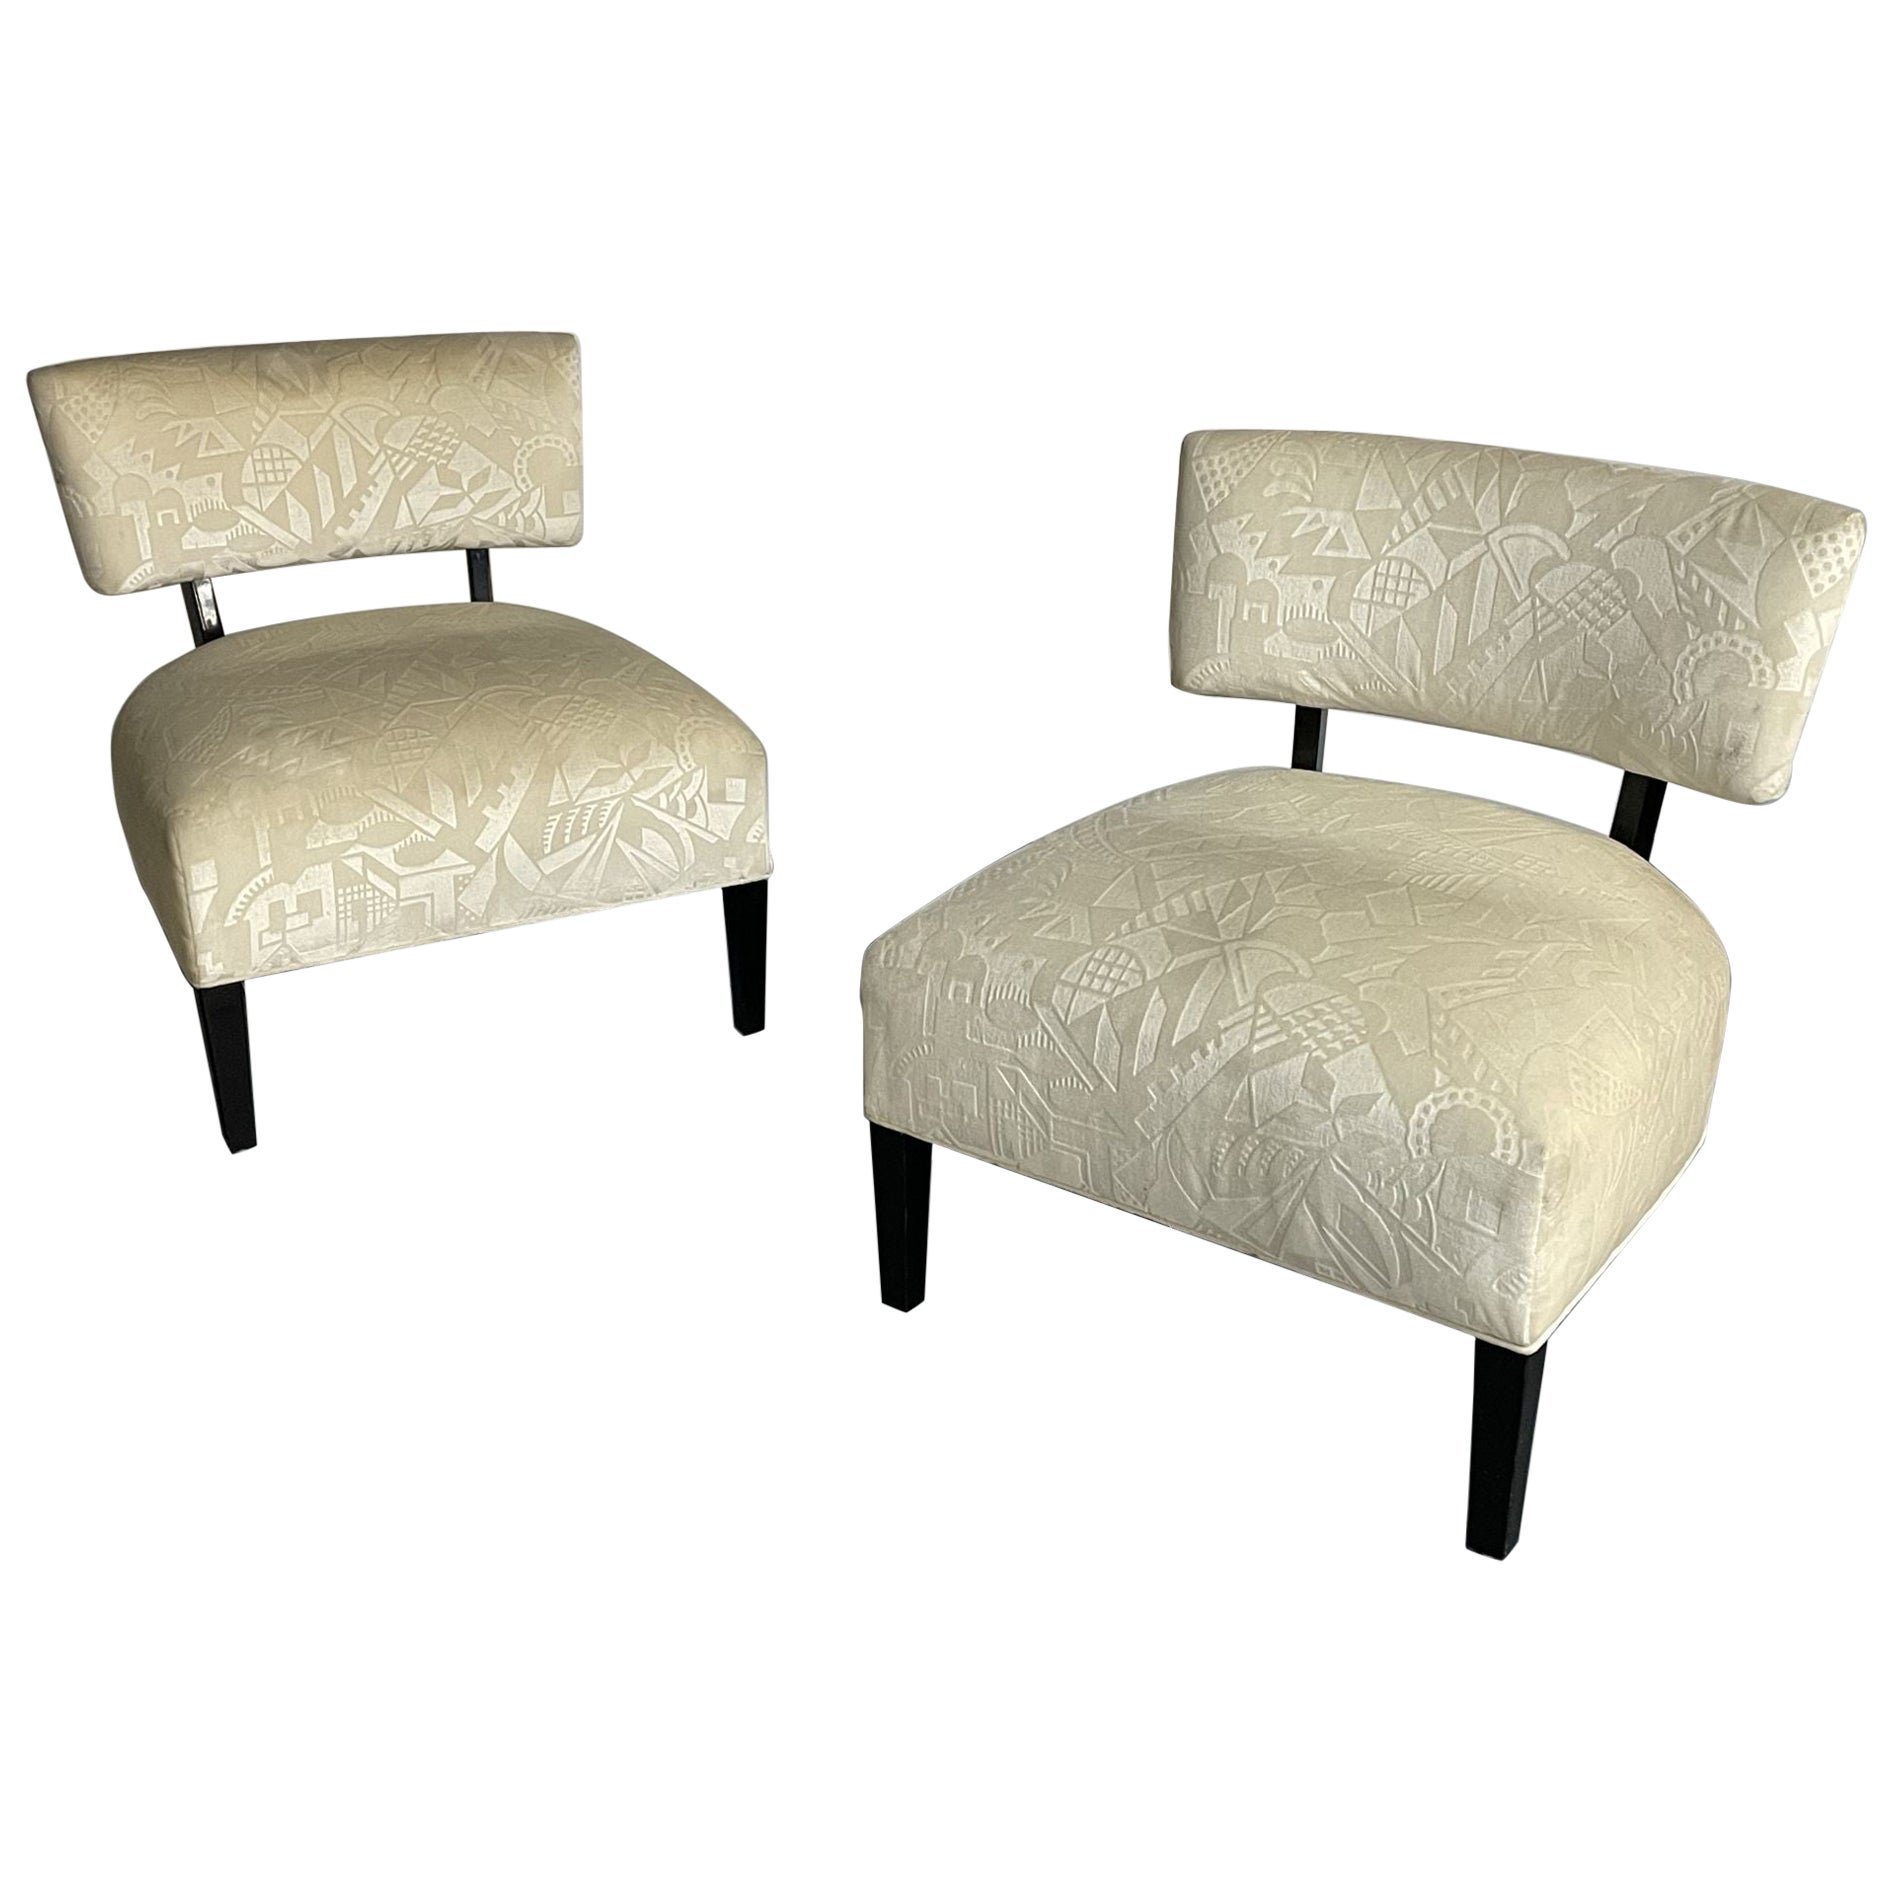 Pair Mid-Century Modern Organic Form Harvey Probber Style Lounge / Slipper Chair For Sale